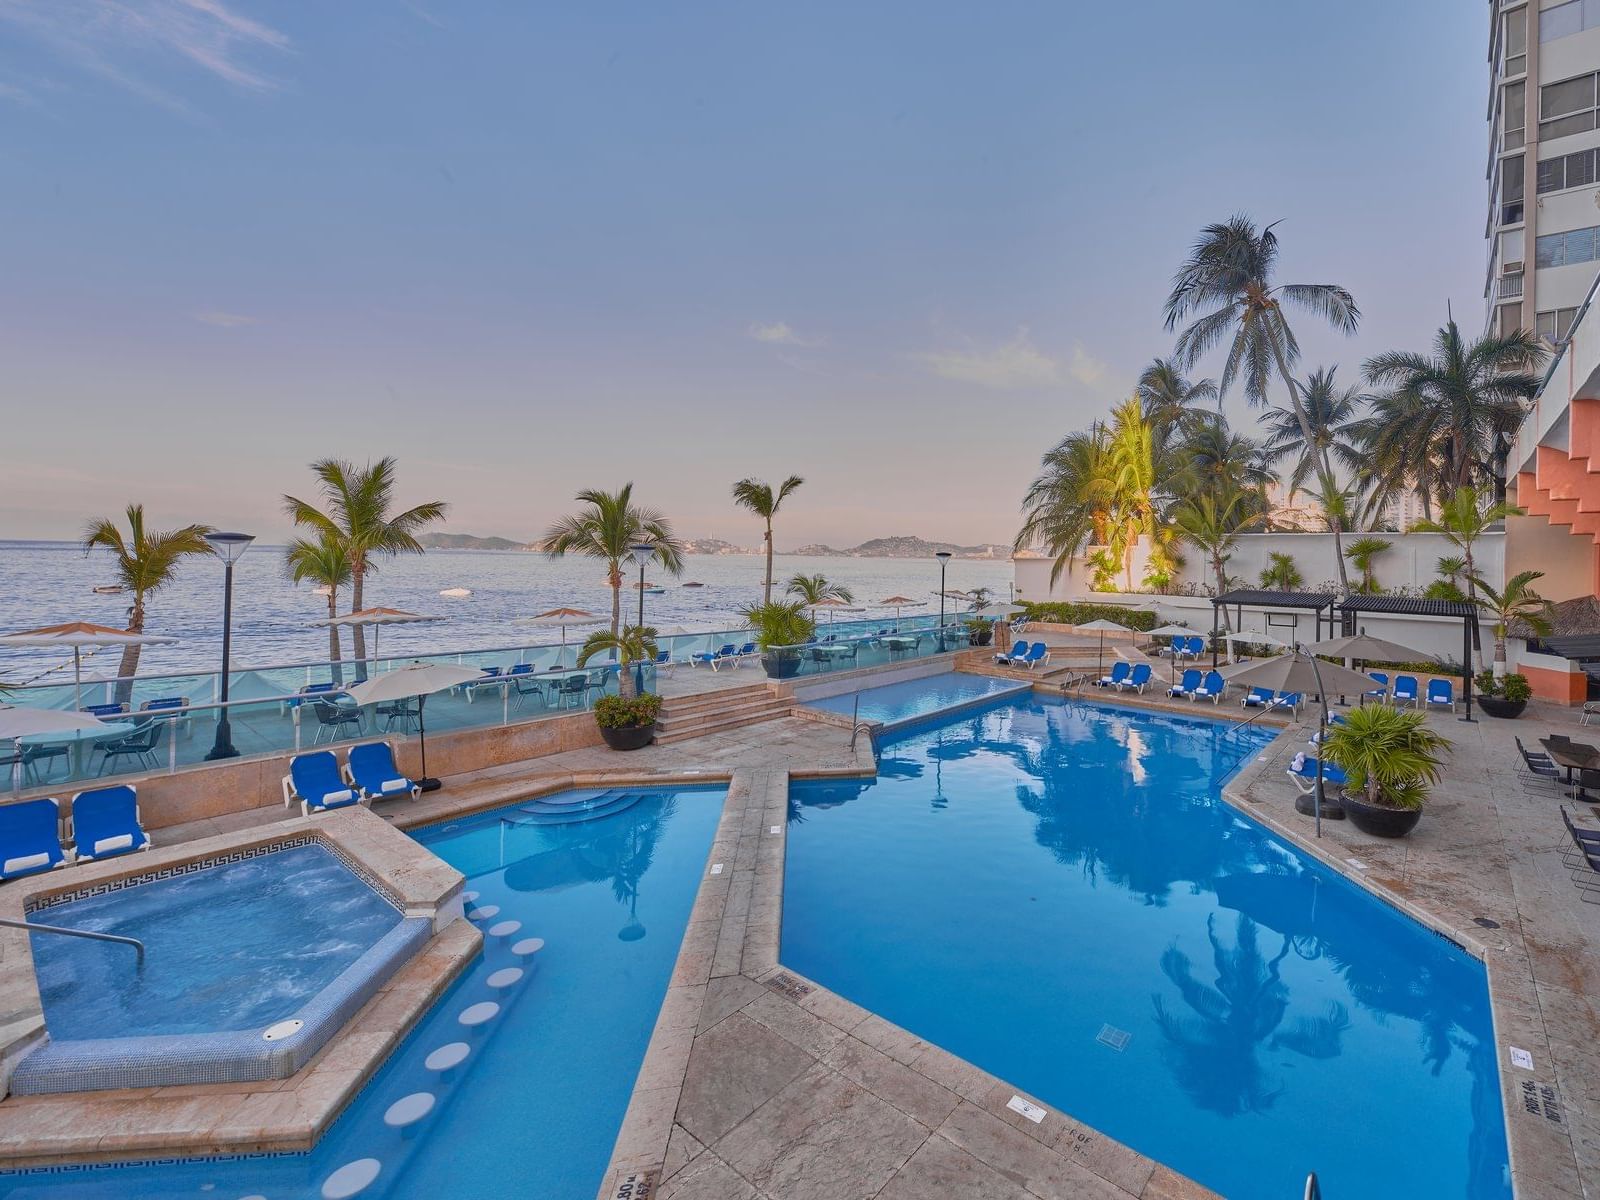 Outdoor pool overlooking the sea at Gamma Hotels